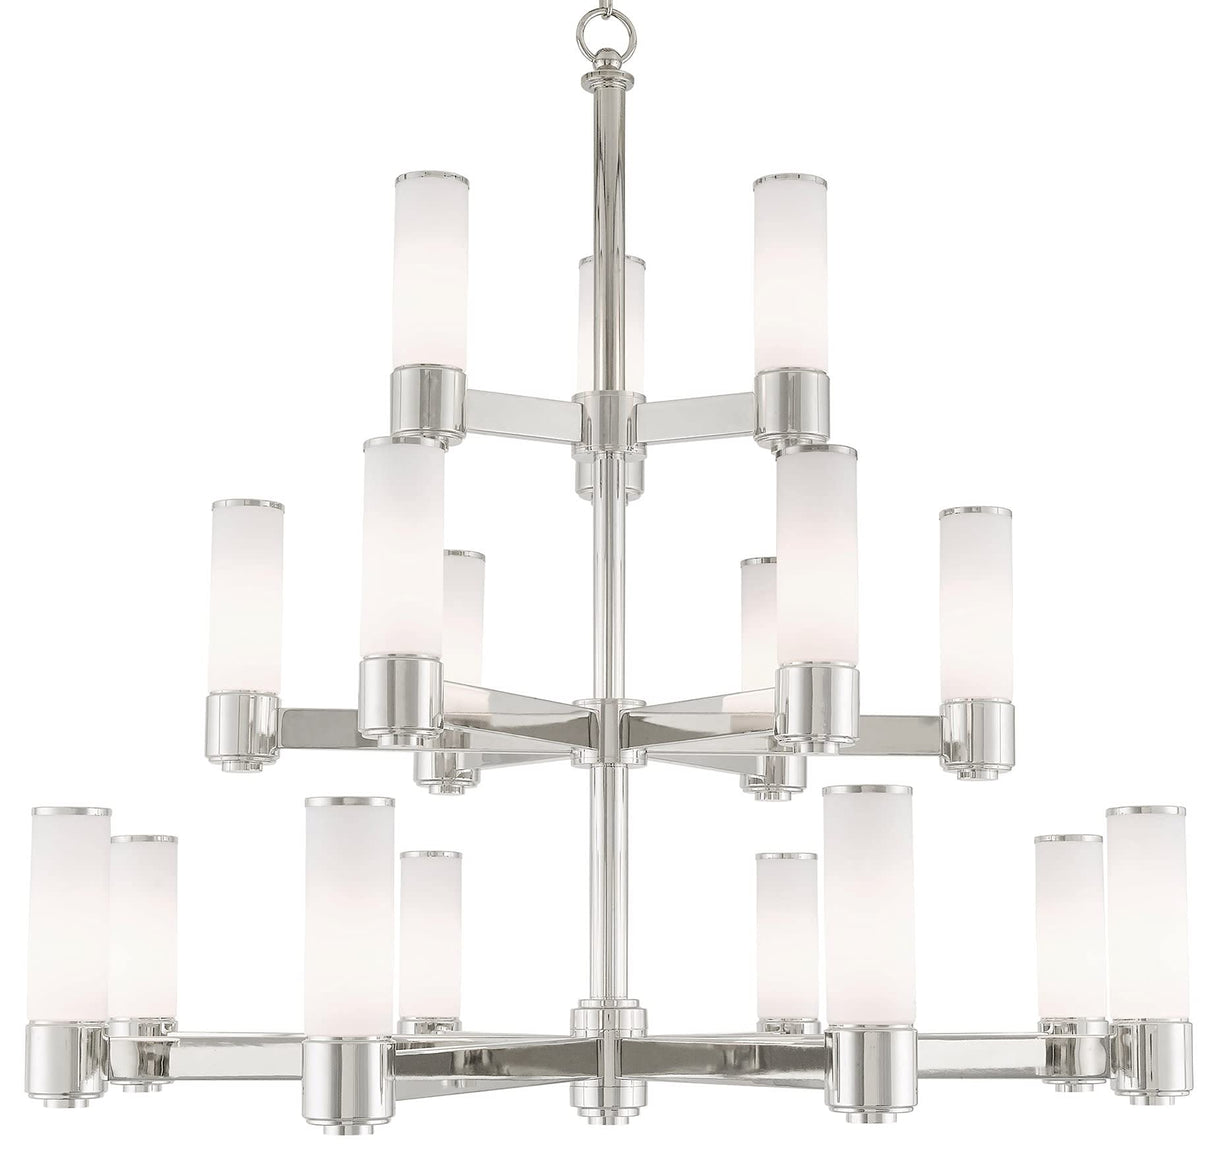 Livex 52119-35 Contemporary Modern 17 Light Foyer Chandelier from Weston Collection in Polished Nickel Finish